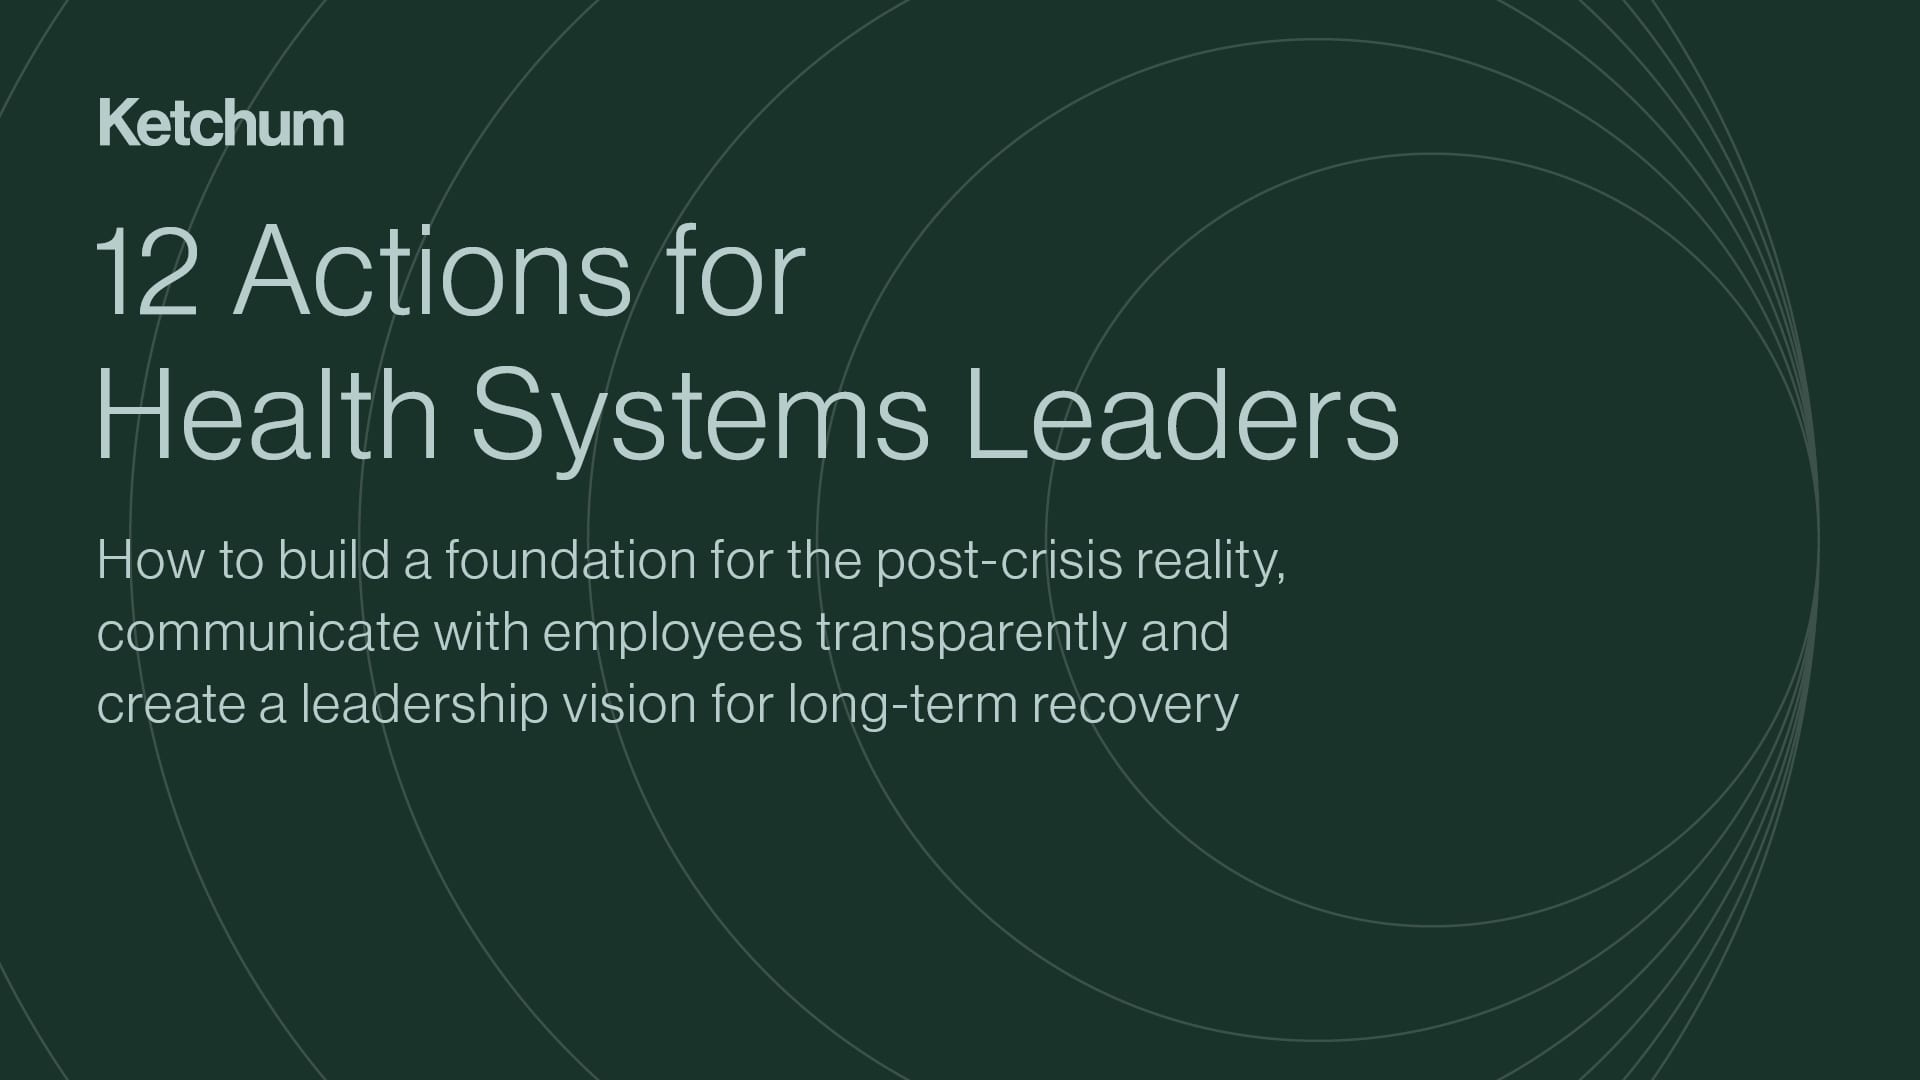 The $2 Trillion COVID-19 Stimulus: How Health Systems Manage Current Needs and Recovery